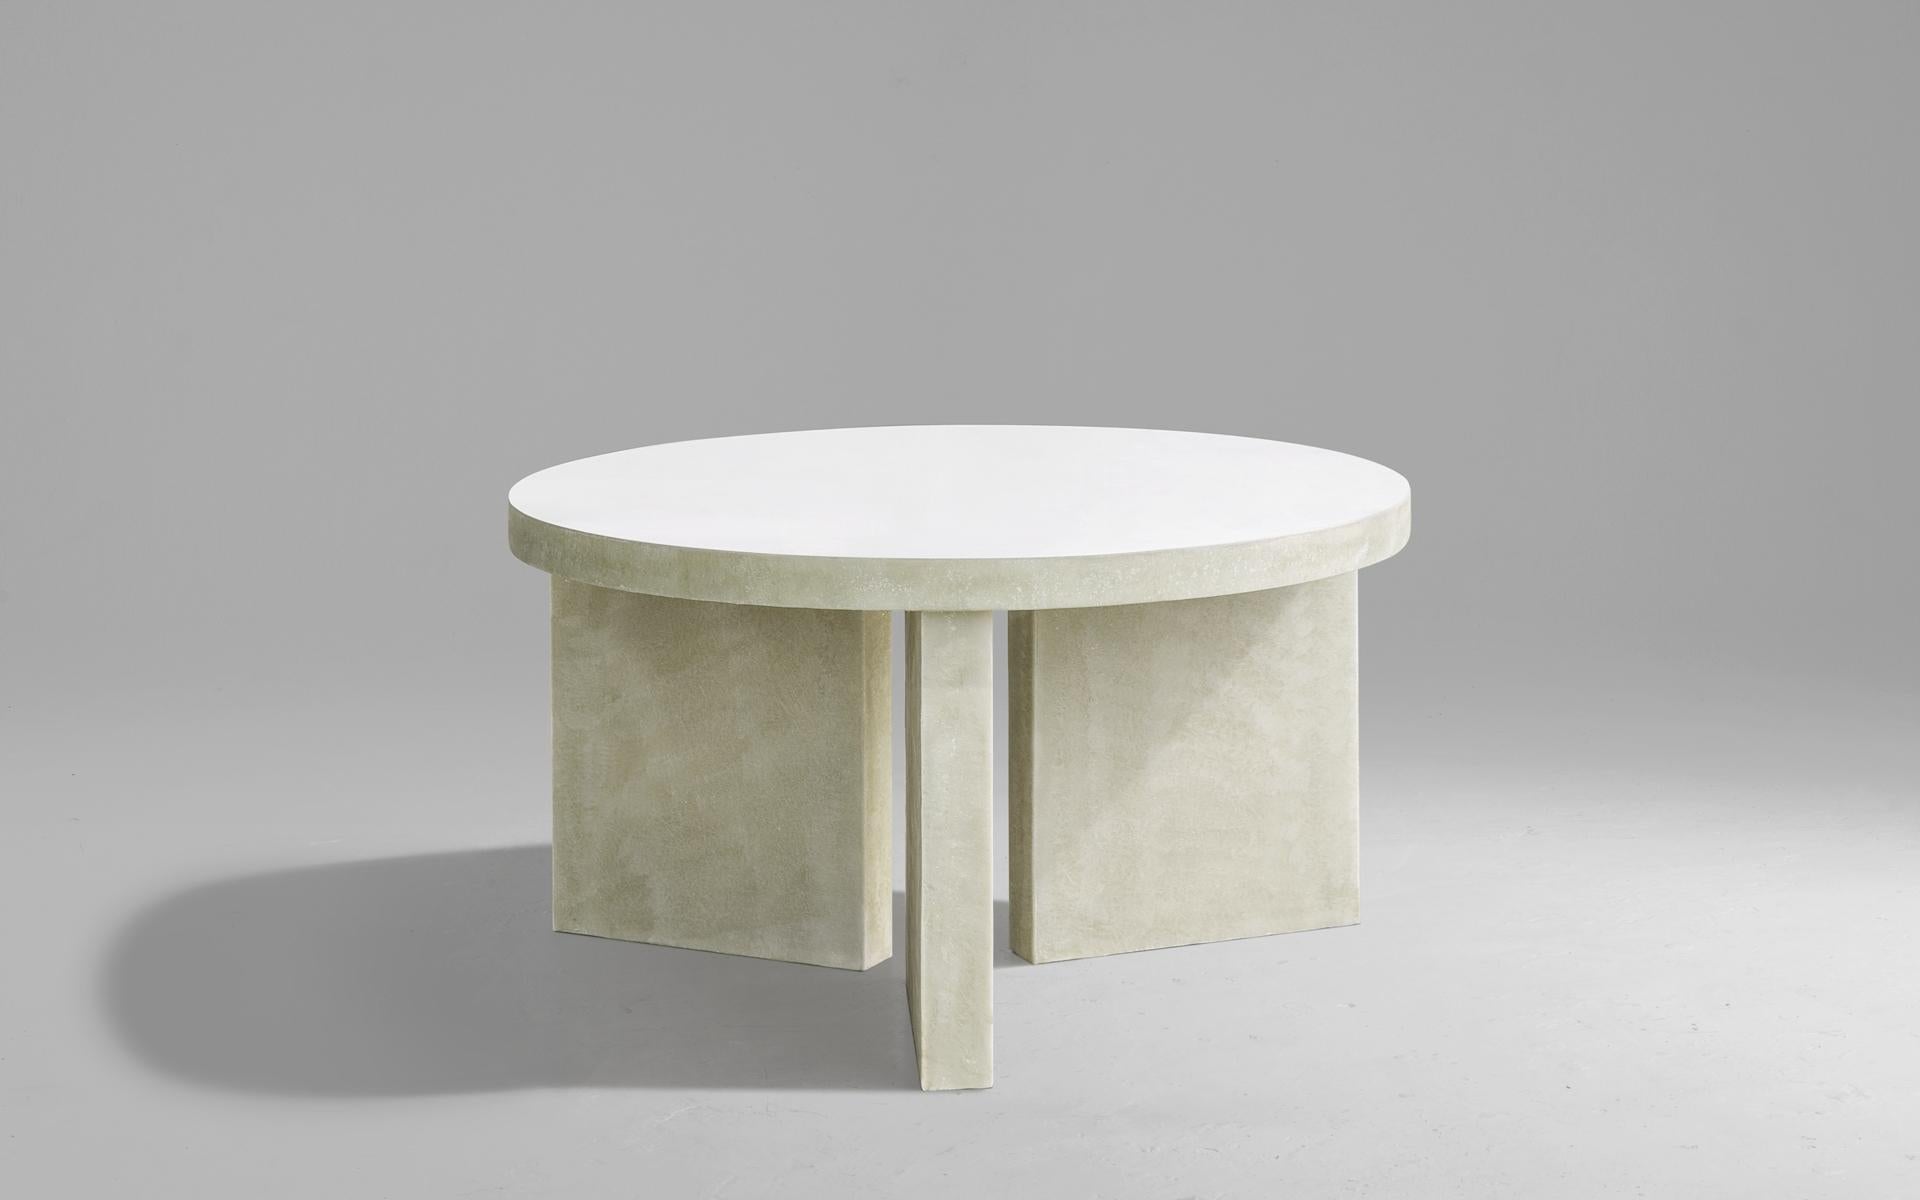 E42 table by Imperfettolab
Dimensions: 90 x H 48 cm
Materials: Fiberglass

Imperfetto Lab
Who we are ? We are a family.
Verter Turroni, Emanuela Ravelli and our children Elia, Margherita and Eusebio.
All together, we are separate parts and